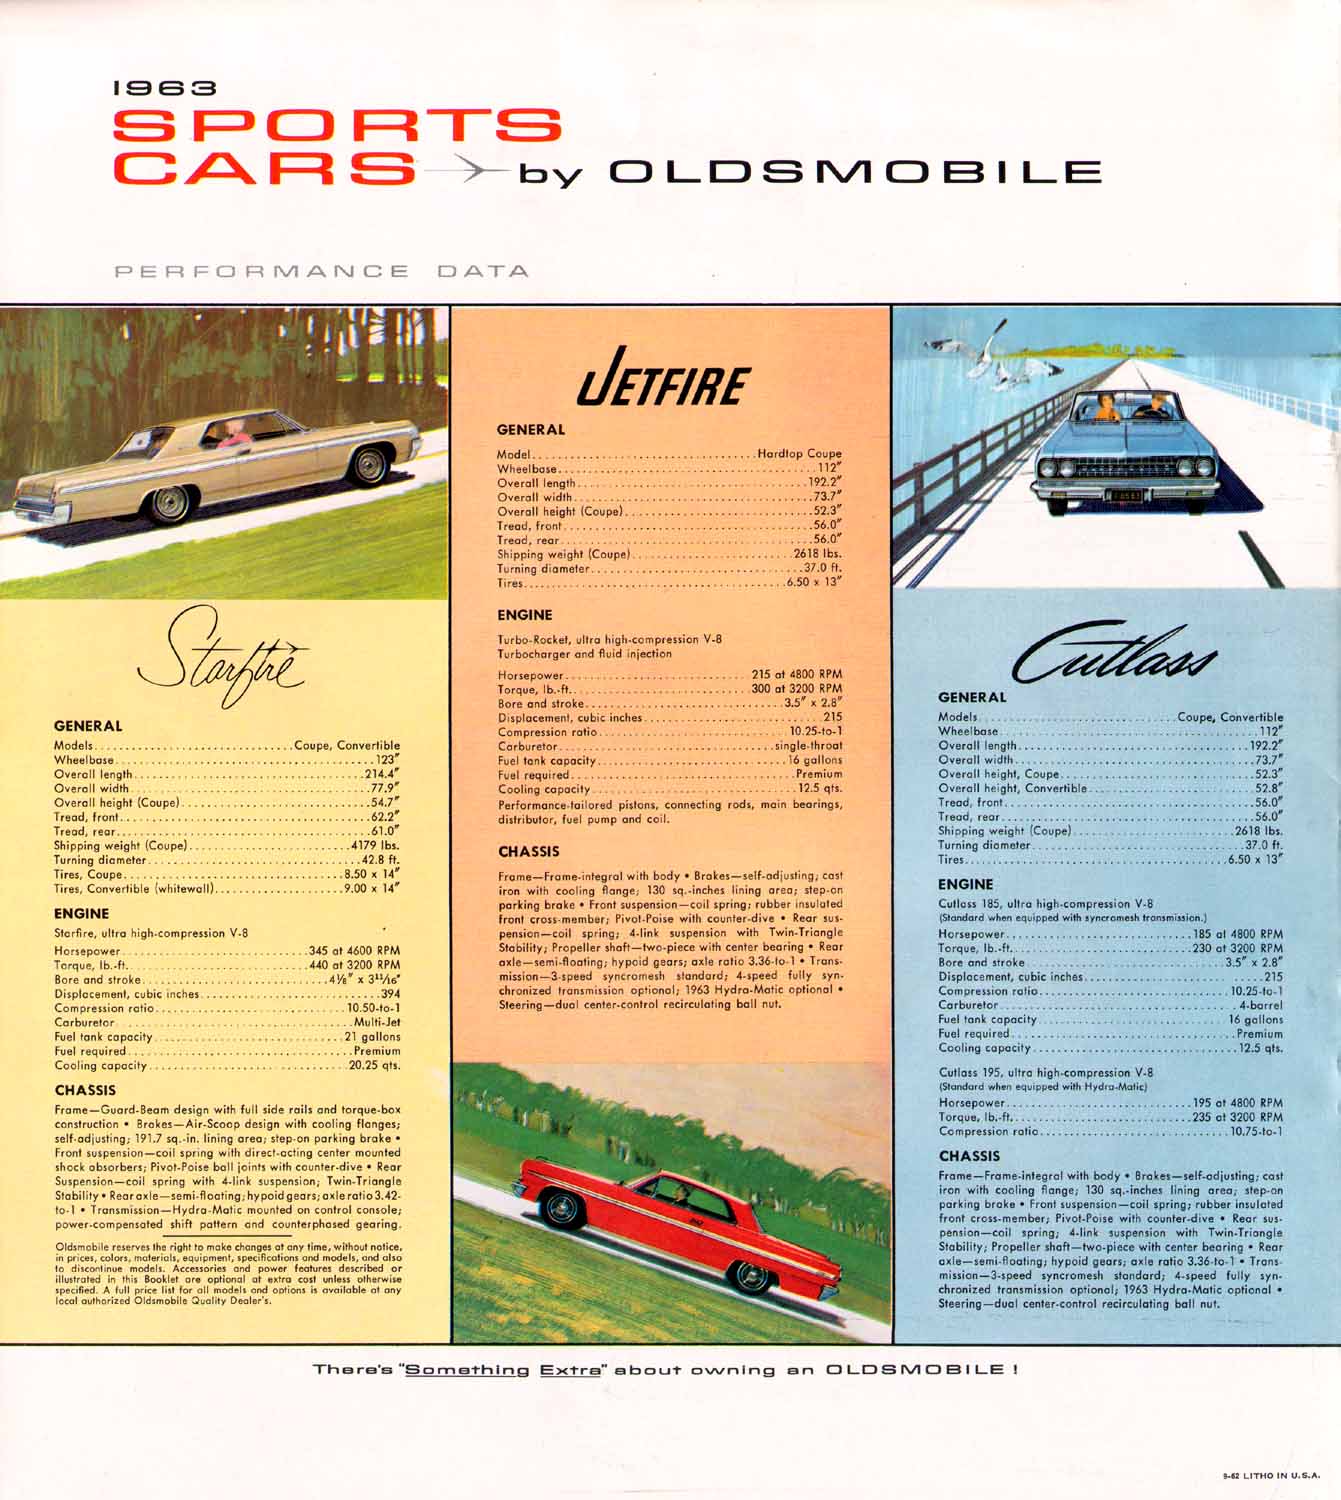 1963 Oldsmobile Sports Cars Brochure Page 4